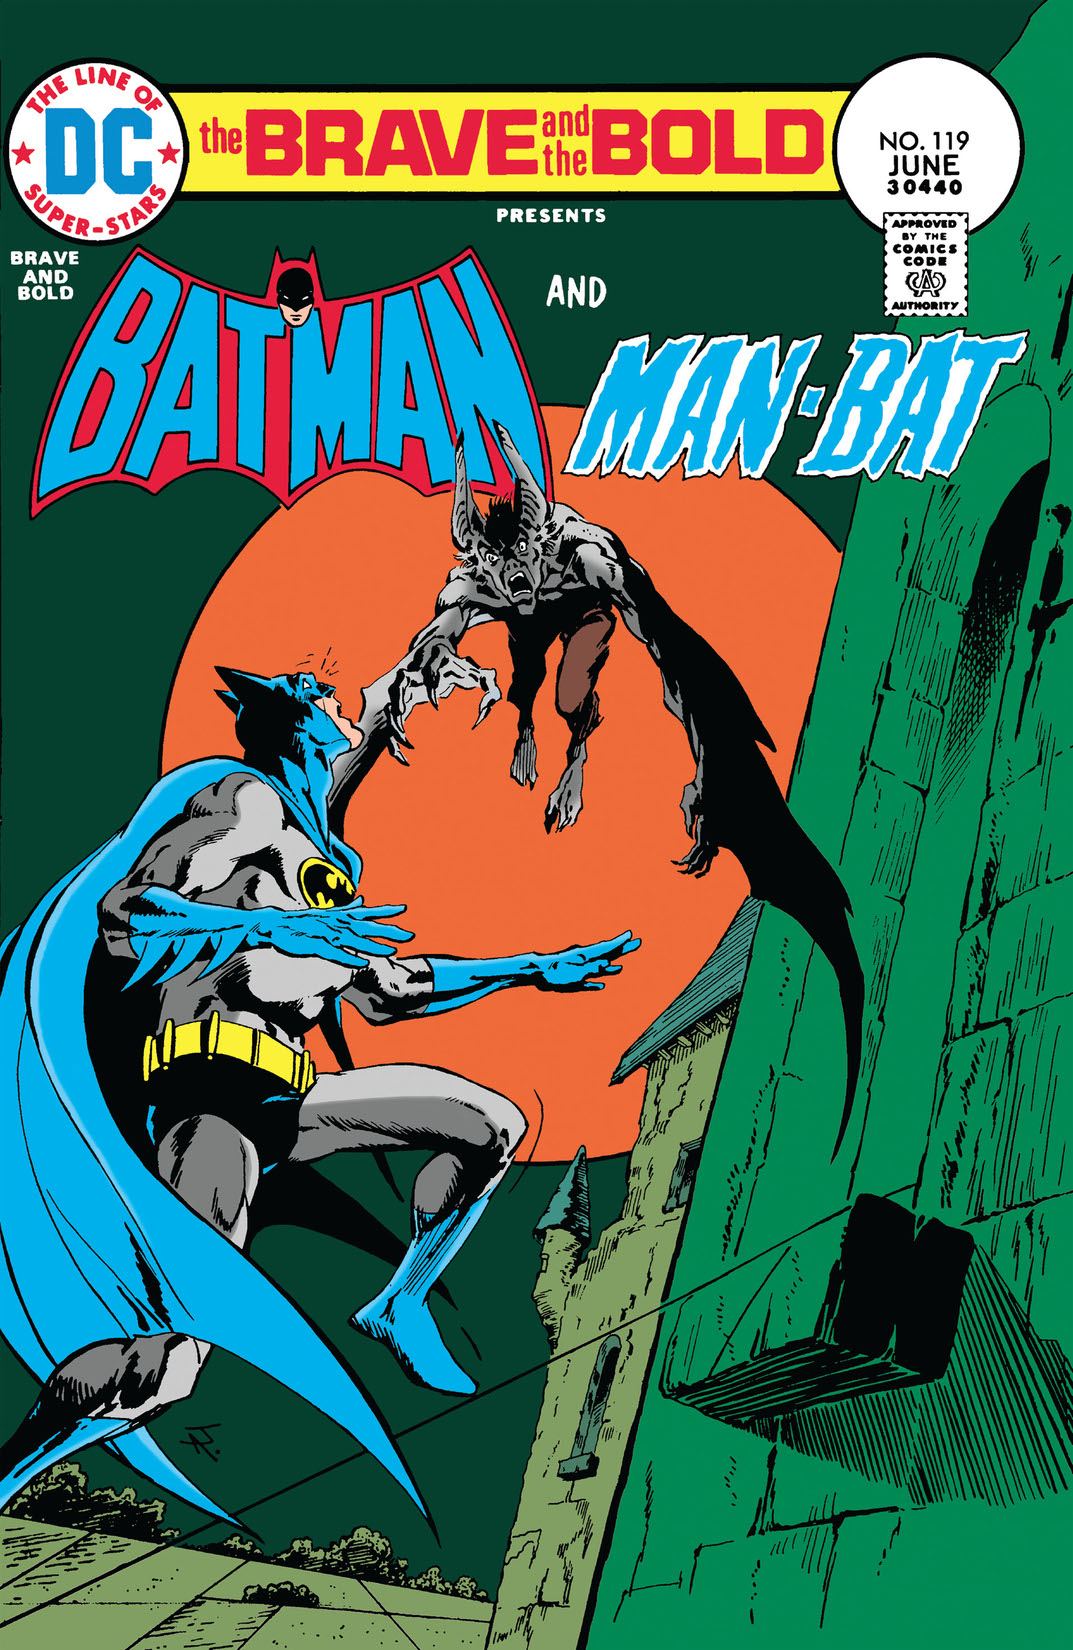 The Brave and the Bold (1955-) #119 preview images